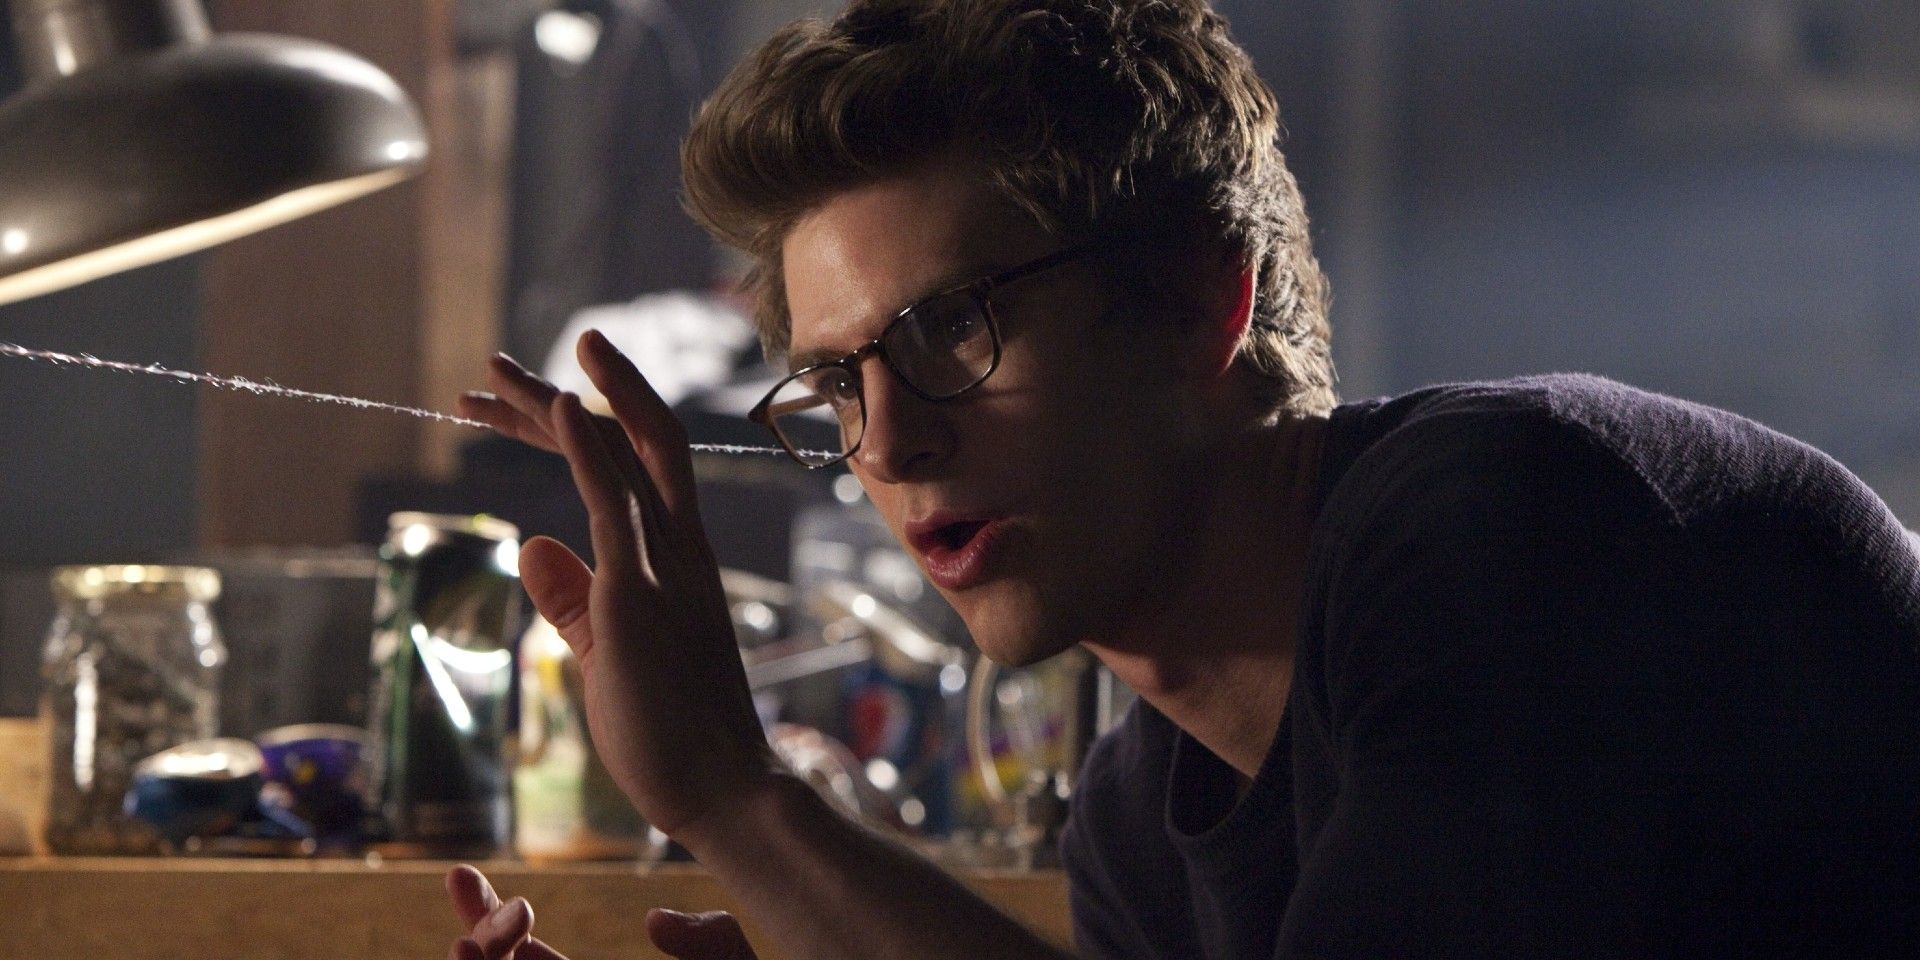 Peter Parker tests his webbing in The Amazing Spider-Man.